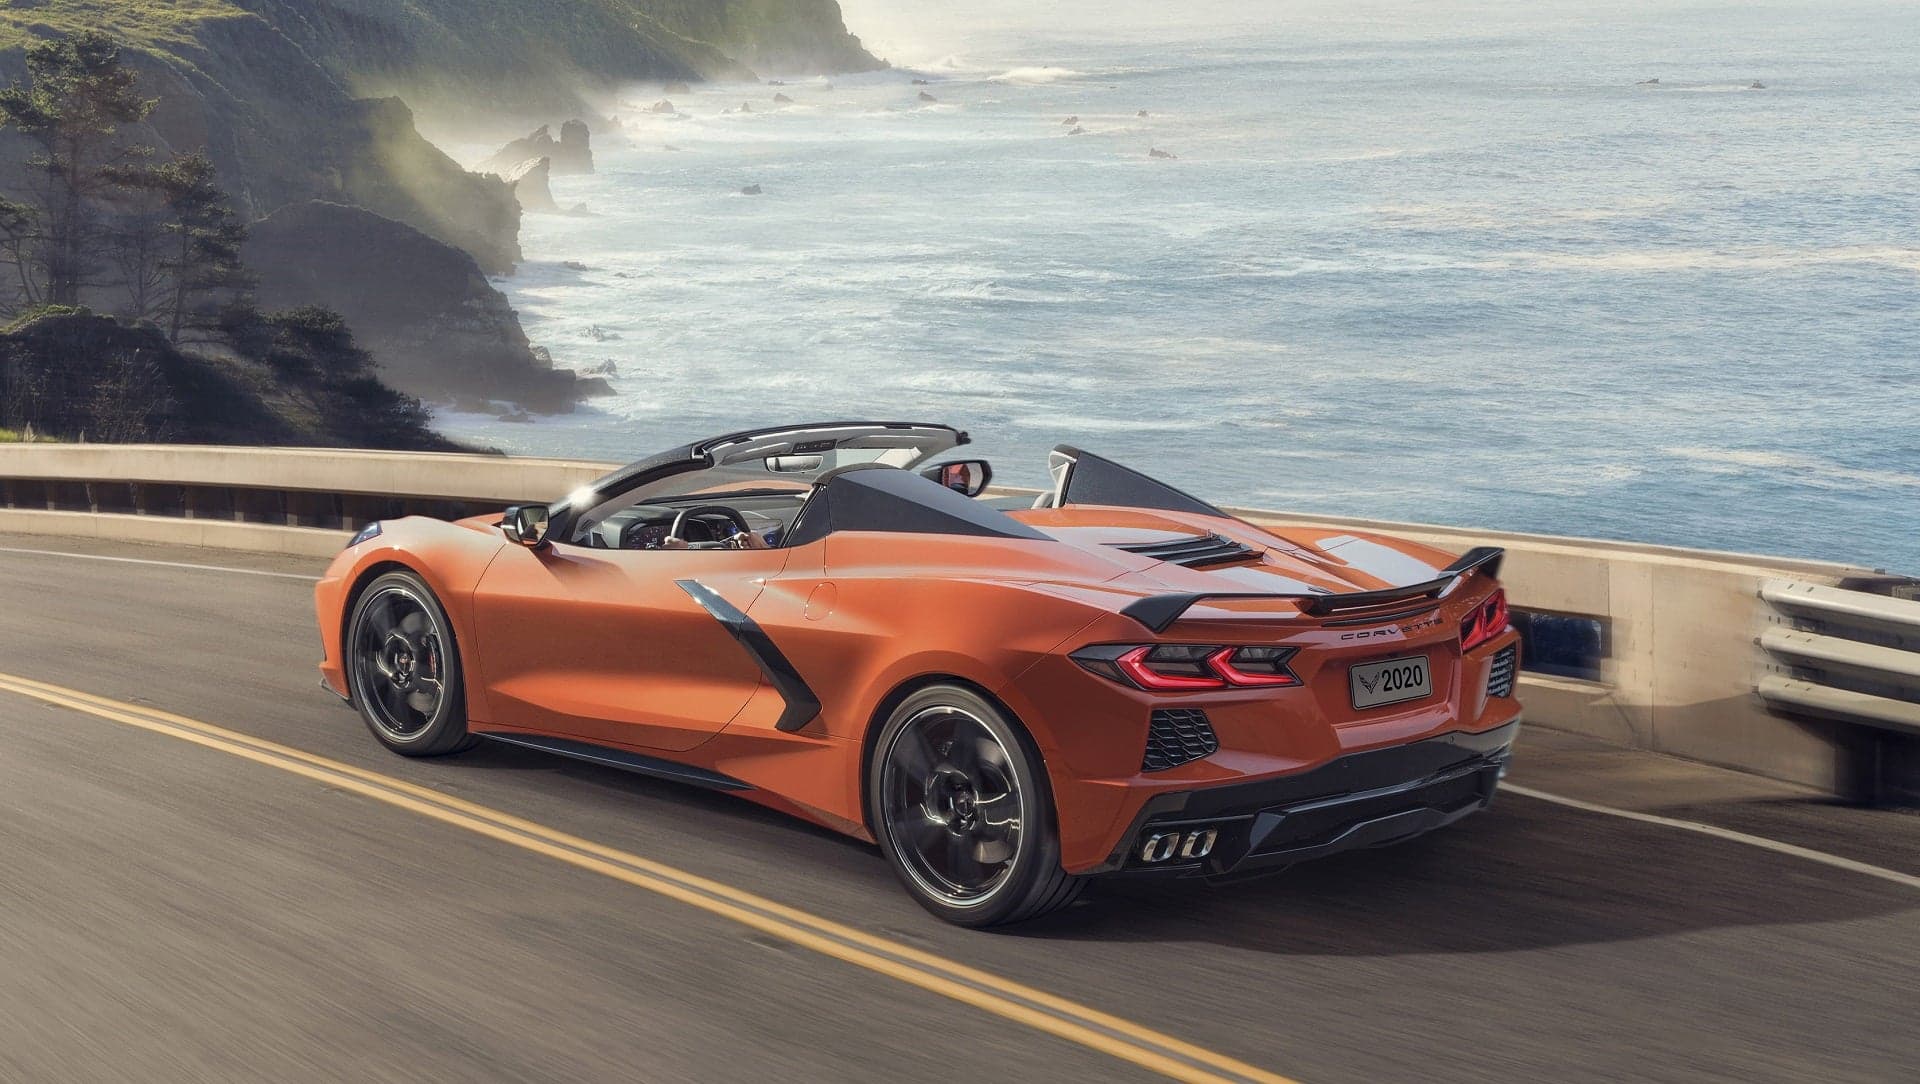 There Might Not Be a 2020 Chevy Corvette C8 Convertible After All